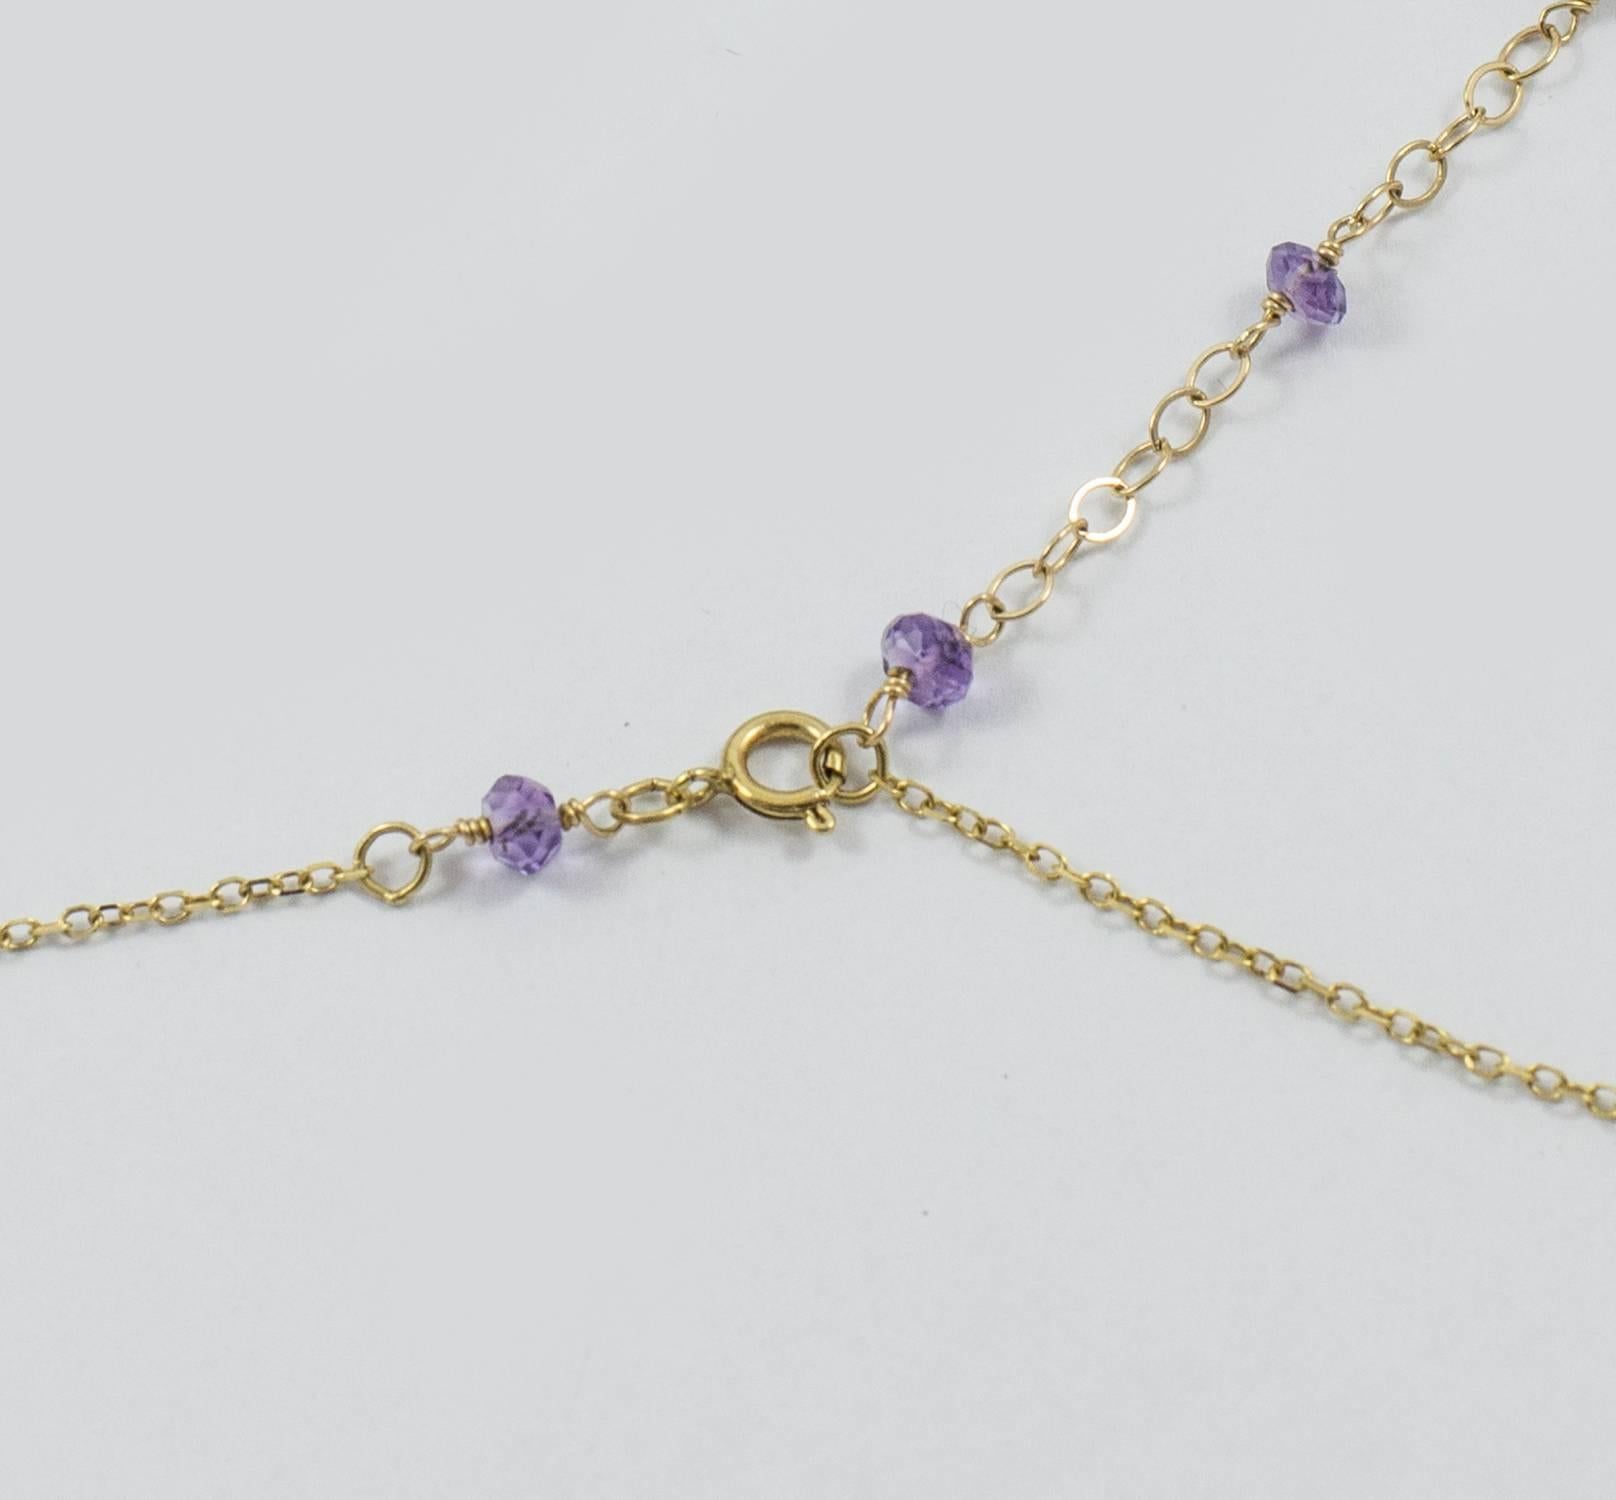 A delightful necklace set in 14k yellow gold. This dramatic necklace suspends bright briolette, pear and bead cut semi precious gemstones. The construction is excellent with much attention to detail as the necklace also has the ability to be